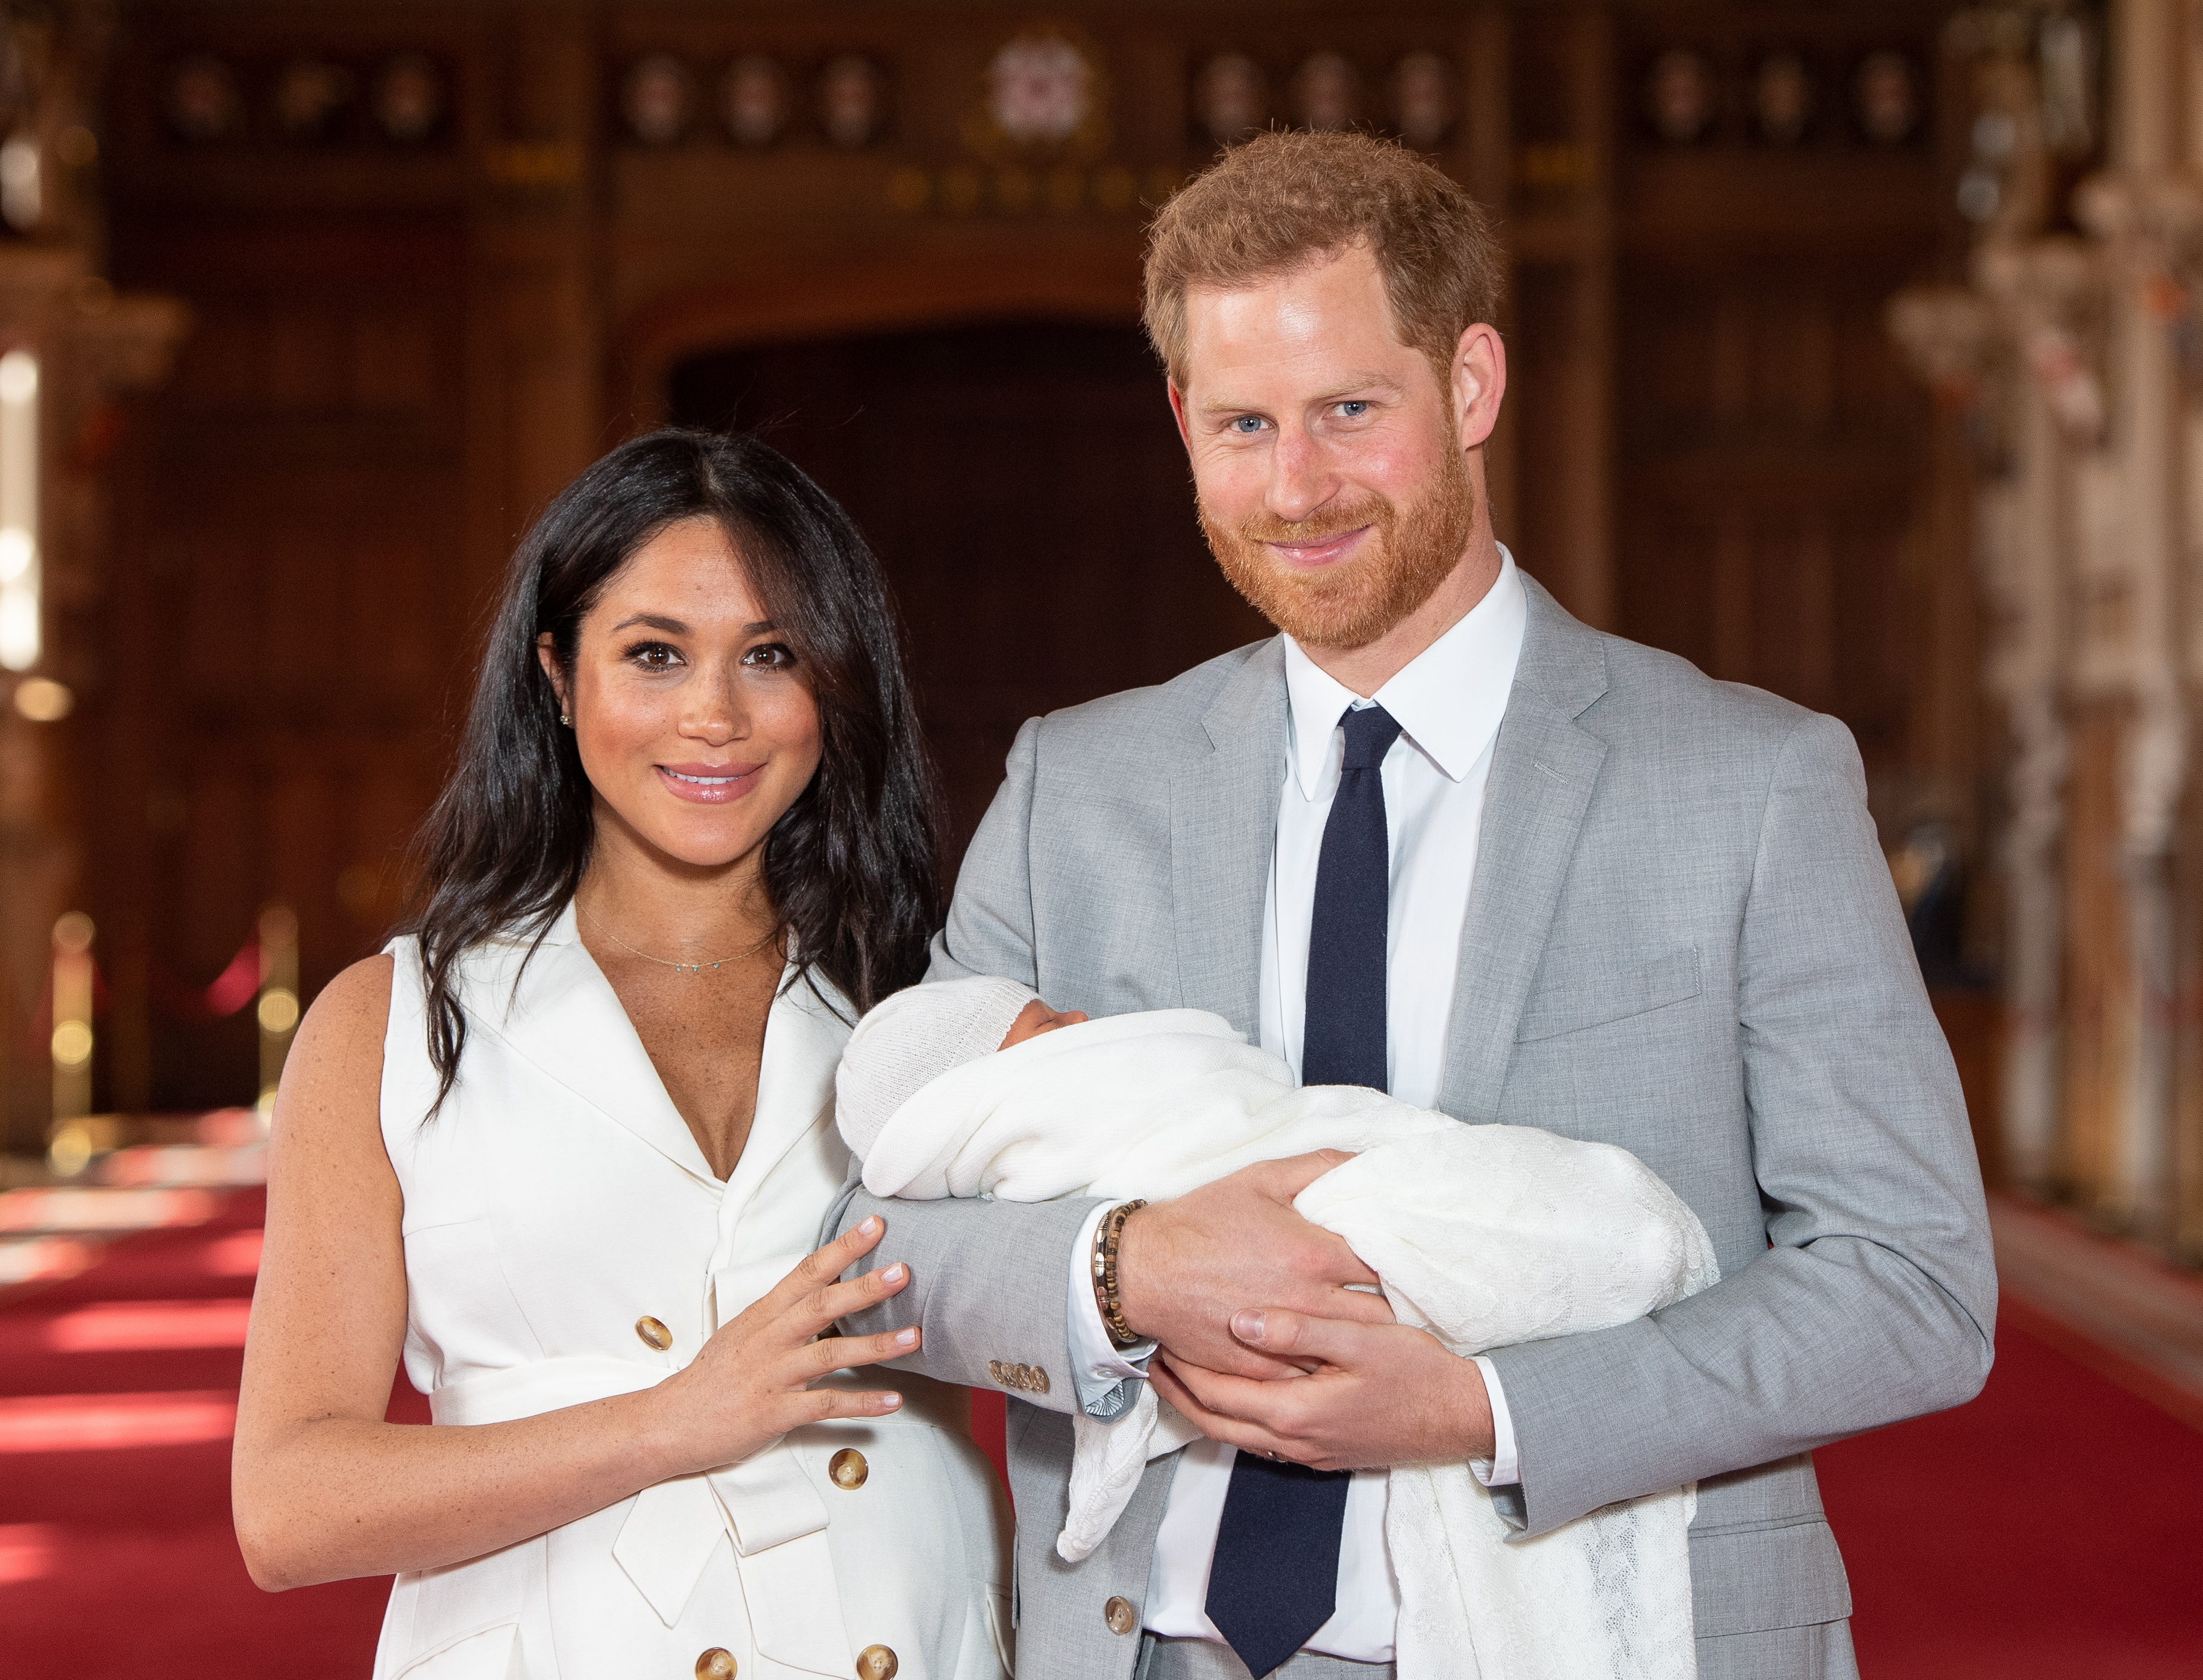 Meghan Markle and Prince Harry pose with their newborn son Archie Harrison Mountbatten-Windsor during a photocall in St George's Hall at Windsor Castle on May 8, 2019 in Windsor, England. | Source: Getty Images